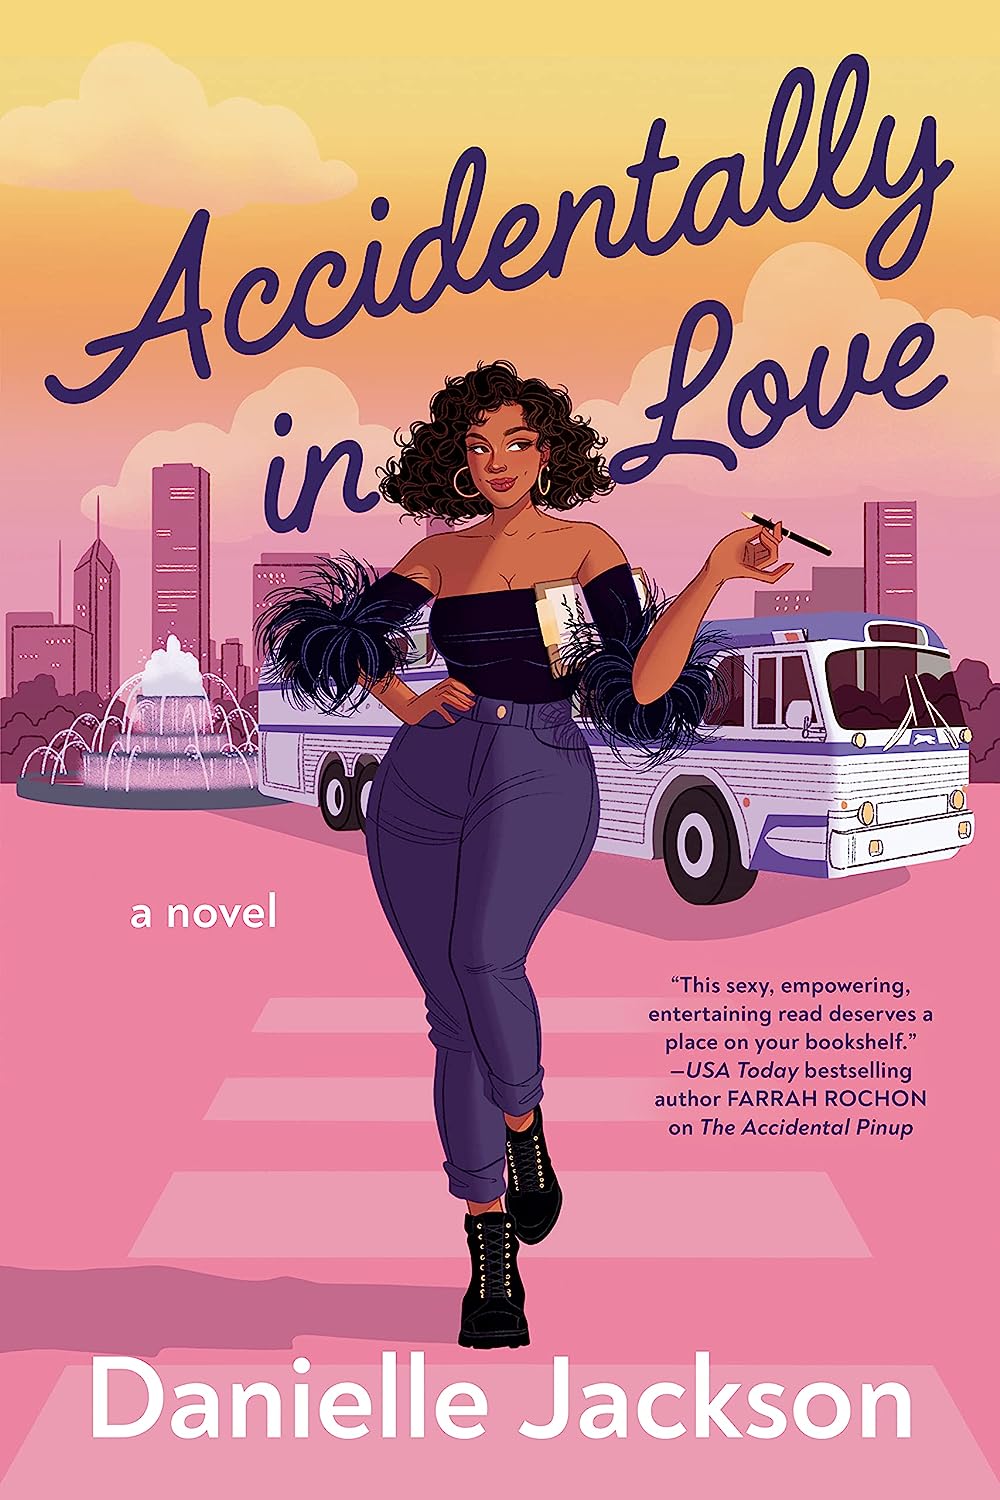 ACCIDENTALLY IN LOVE by Danielle Jackson